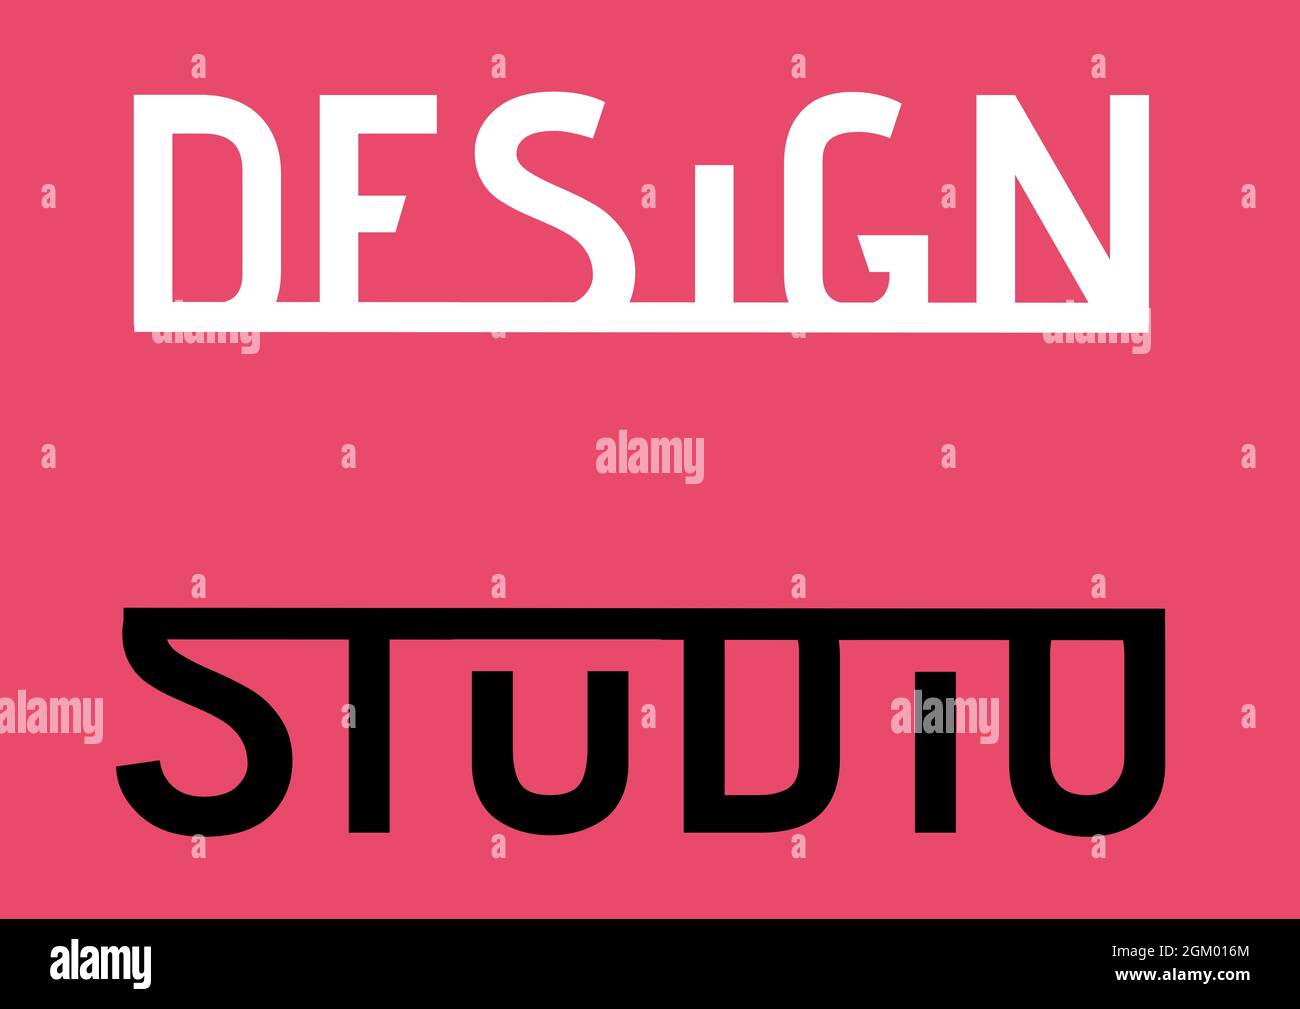 Digitally generated image of design studio text banner against pink background Stock Photo